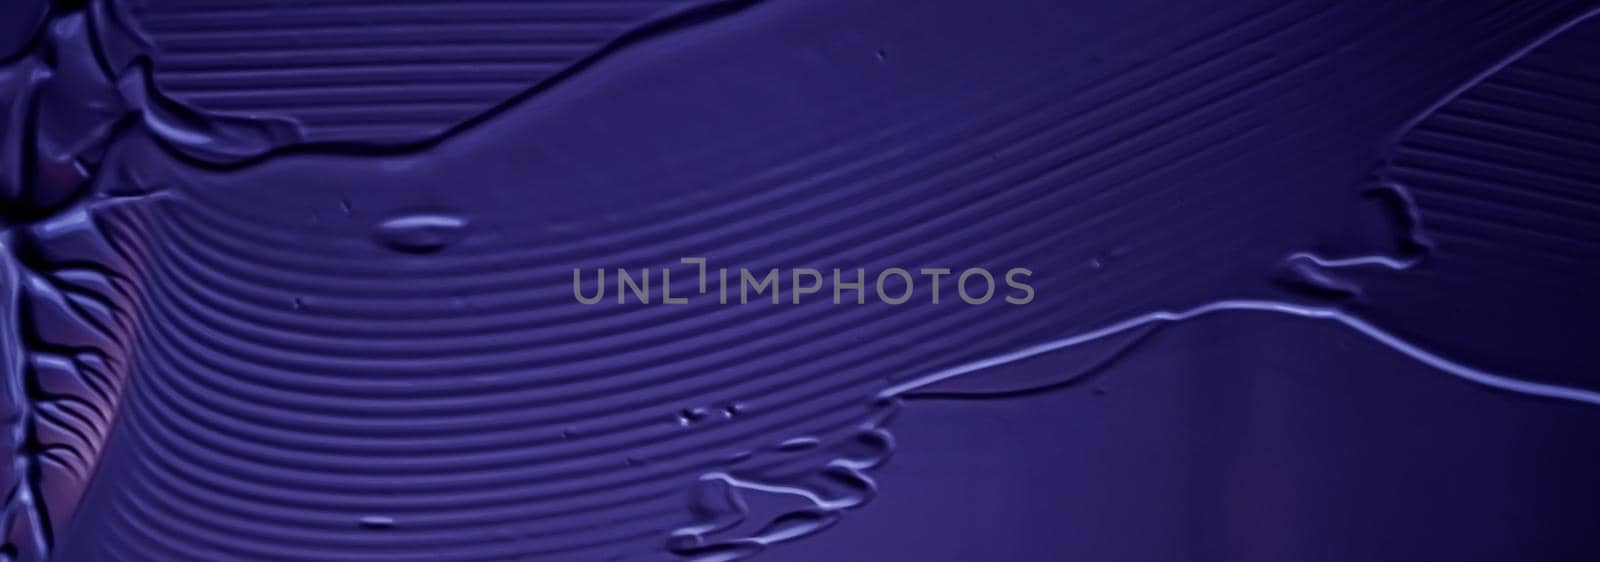 Purple cream texture background, cosmetic product and makeup backdrop for luxury beauty brand, holiday banner design, abstract wall art or artistic paint brush strokes.